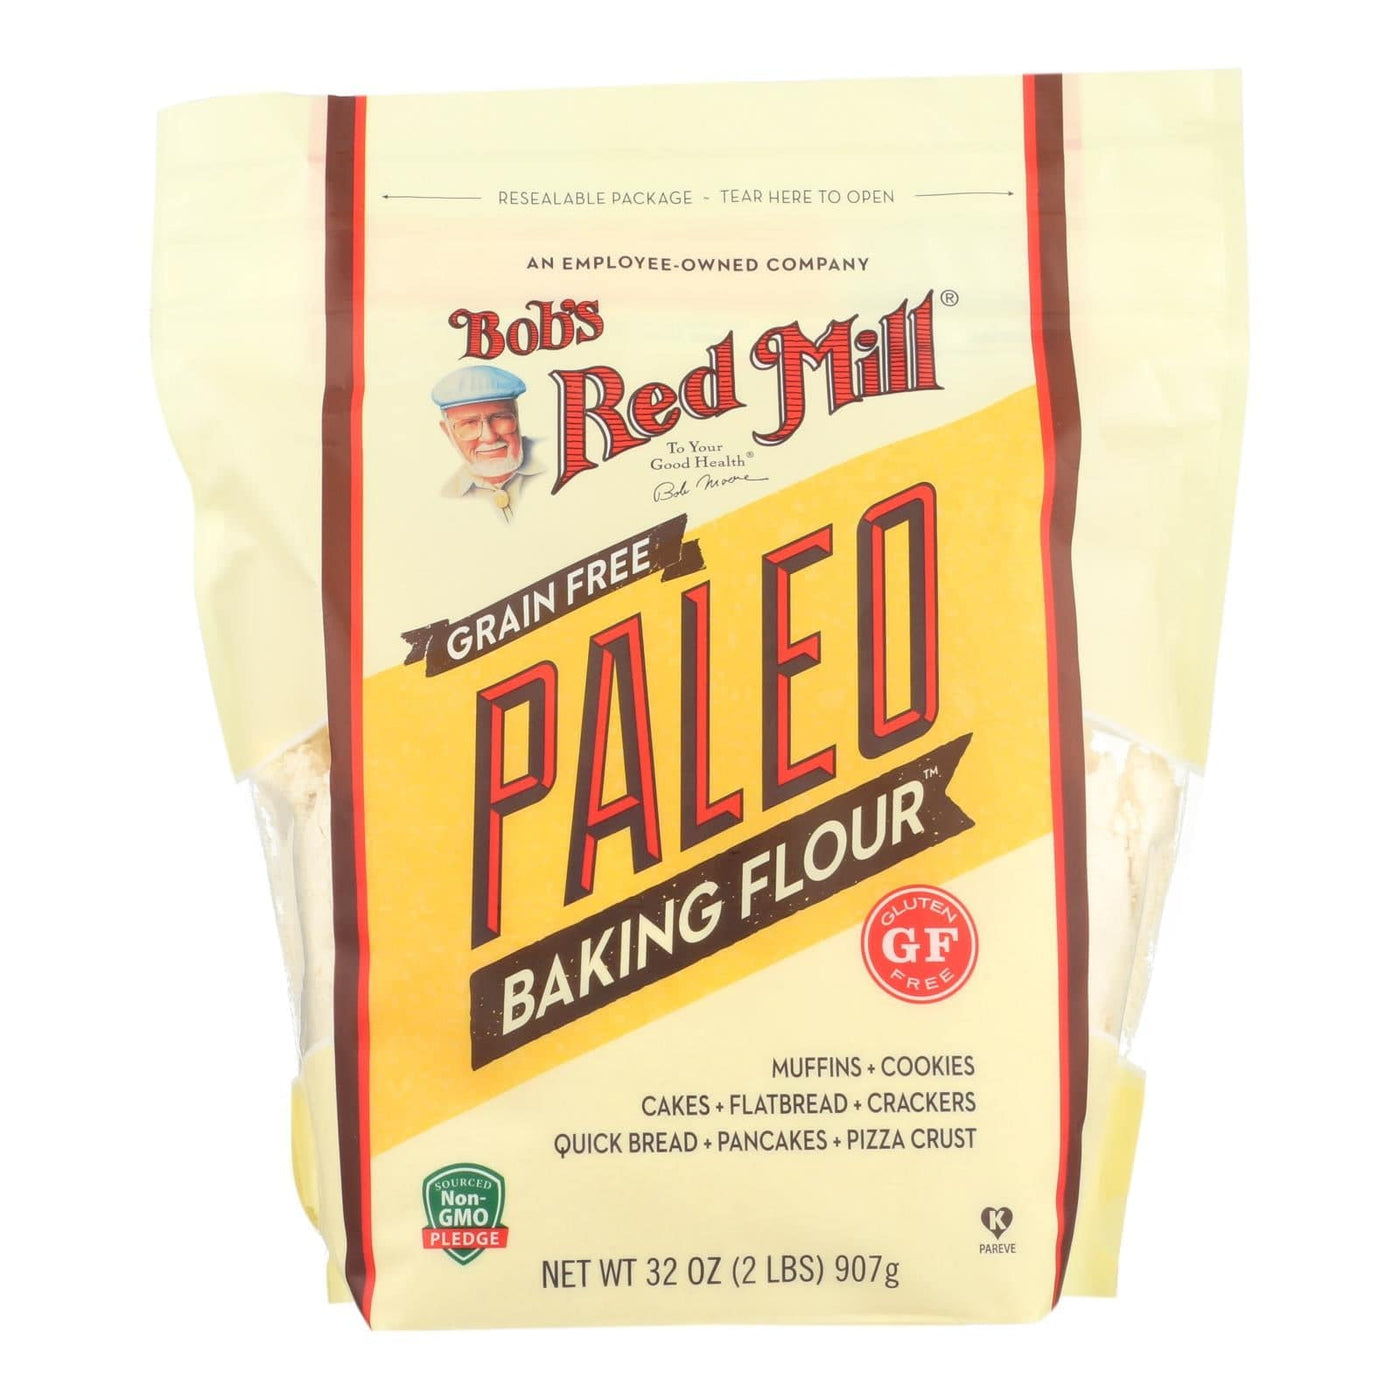 Bob's Red Mill - Baking Flour Paleo - Case Of 4-32 Oz | OnlyNaturals.us